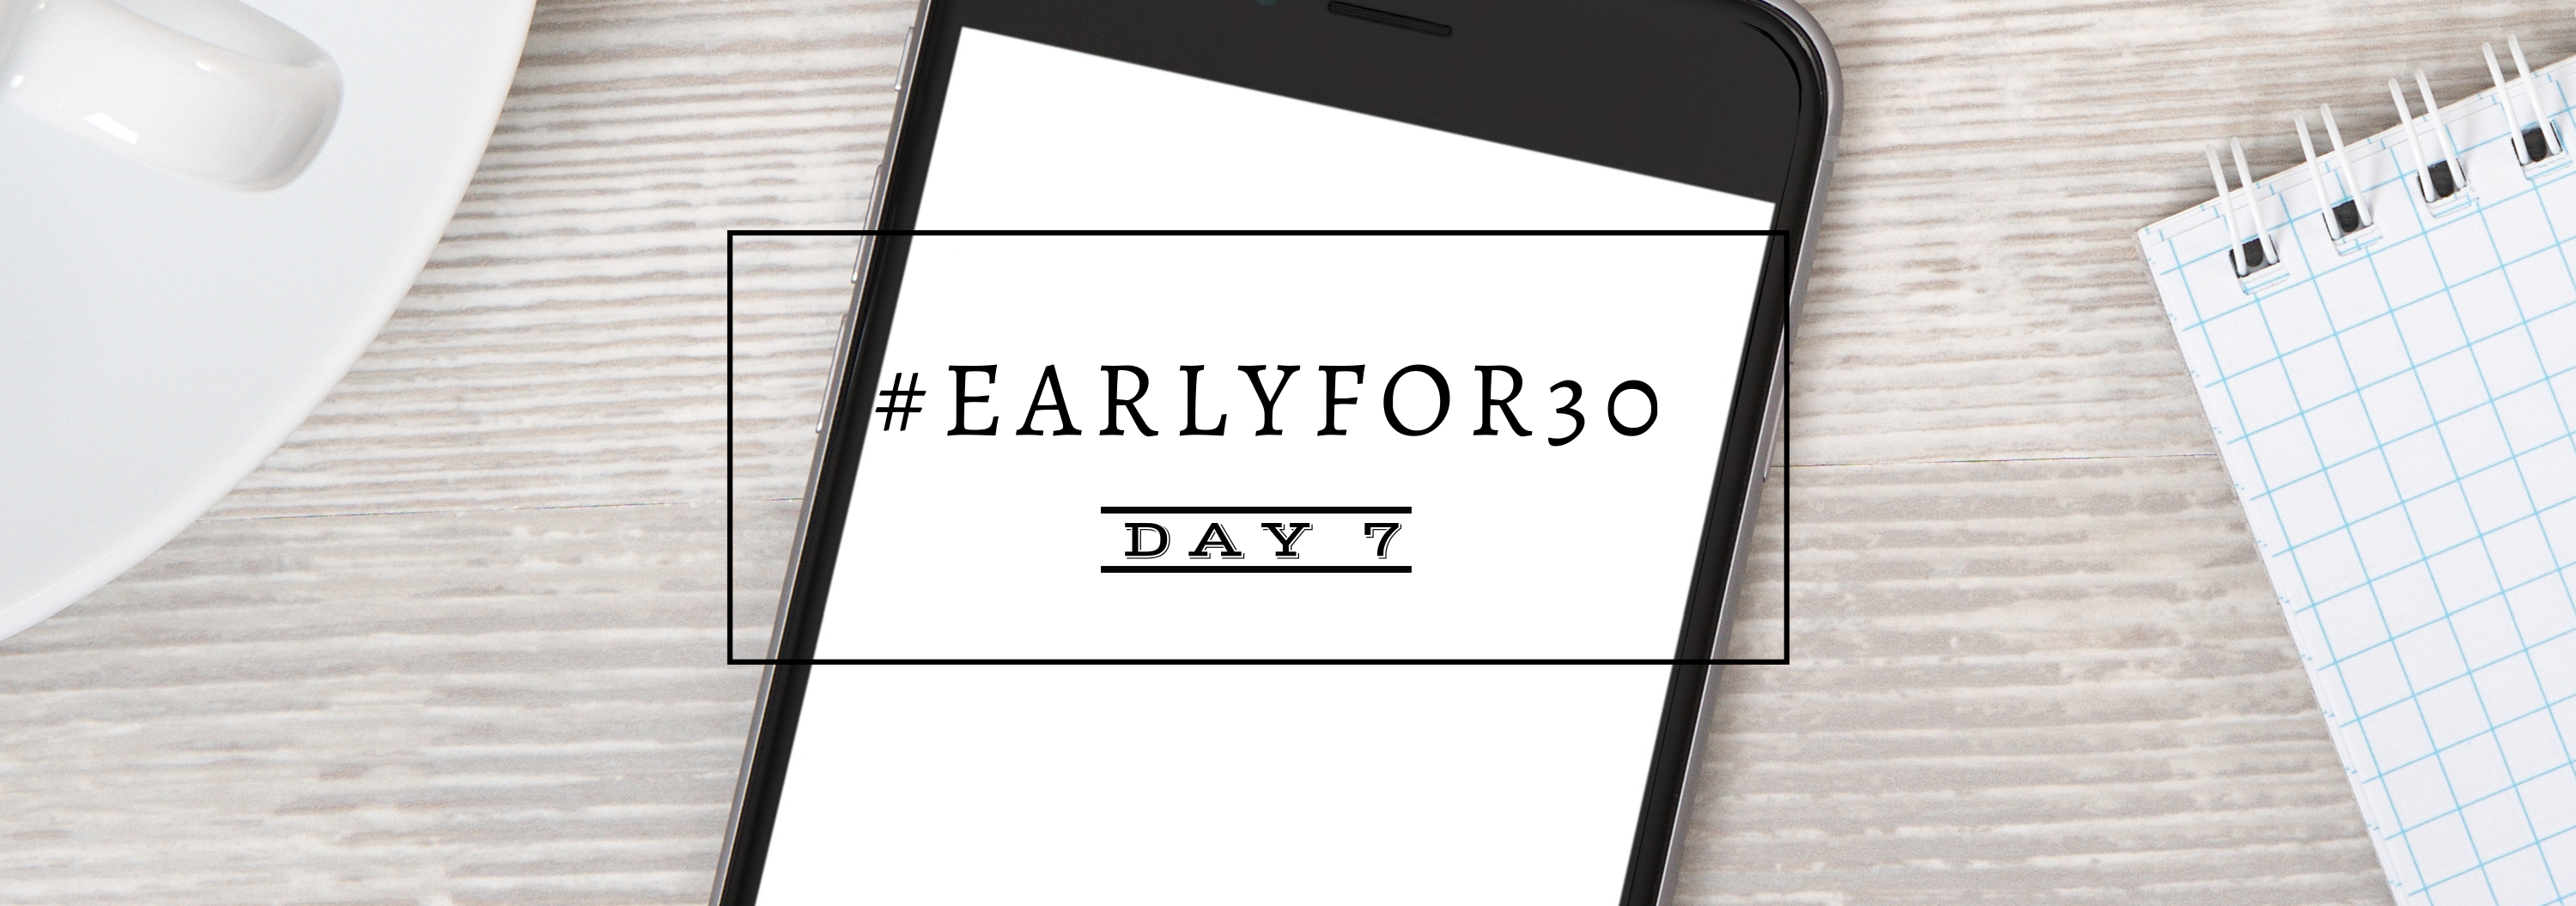 #Earlyfor30 – Day 7